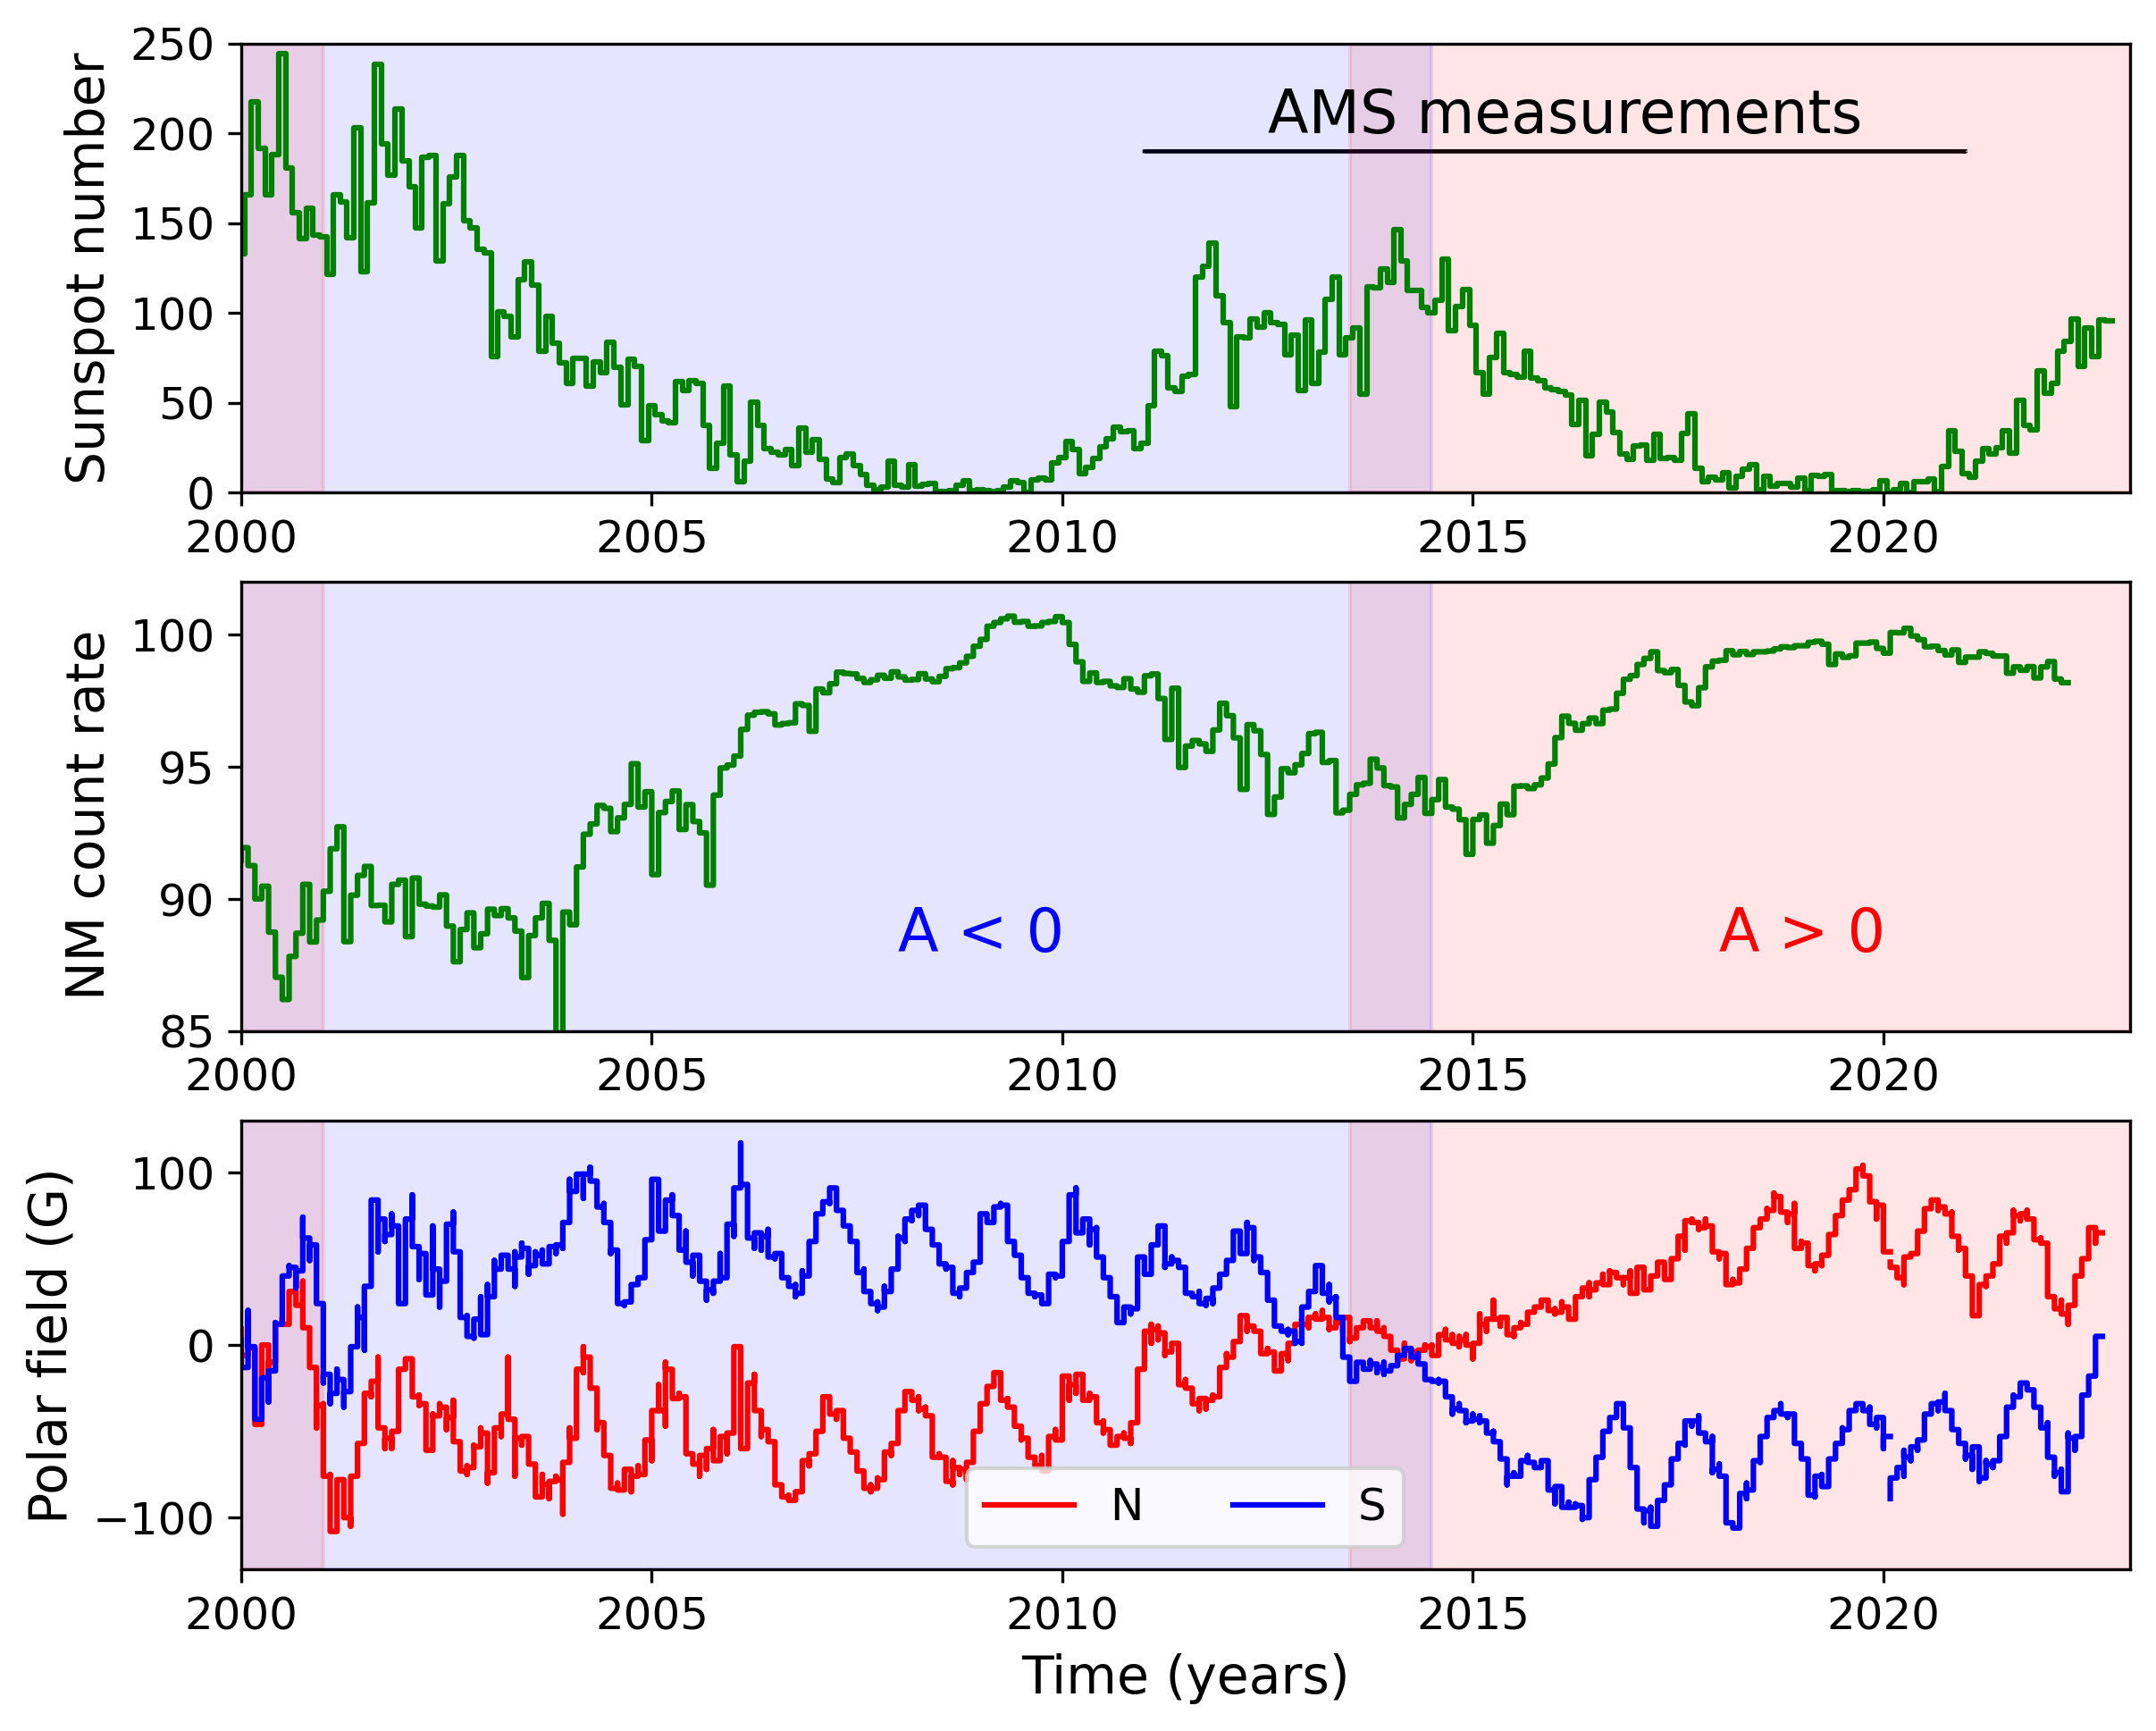 Figure 2: The top panel shows the solar-activity cycle as observed through the sunspot number. The shaded regions represent times of peak activity. The AMS Collaboration [4] used data taken during the indicated period. The middle panel shows the GCR count rate recorded at the Hermanus neutron monitor (NM) in South Africa, with the Sun’s magnetic-polarity cycles (A < 0 and A > 0) indicated. The bottom panel shows the sign and magnitude of the northern (N) and southern (S) solar magnetic fields that define the polarity cycles. Data sources: top panel, Royal Observatory of Belgium; middle panel, South African Neutron Monitor Program; bottom panel, Wilcox Solar Observatory.